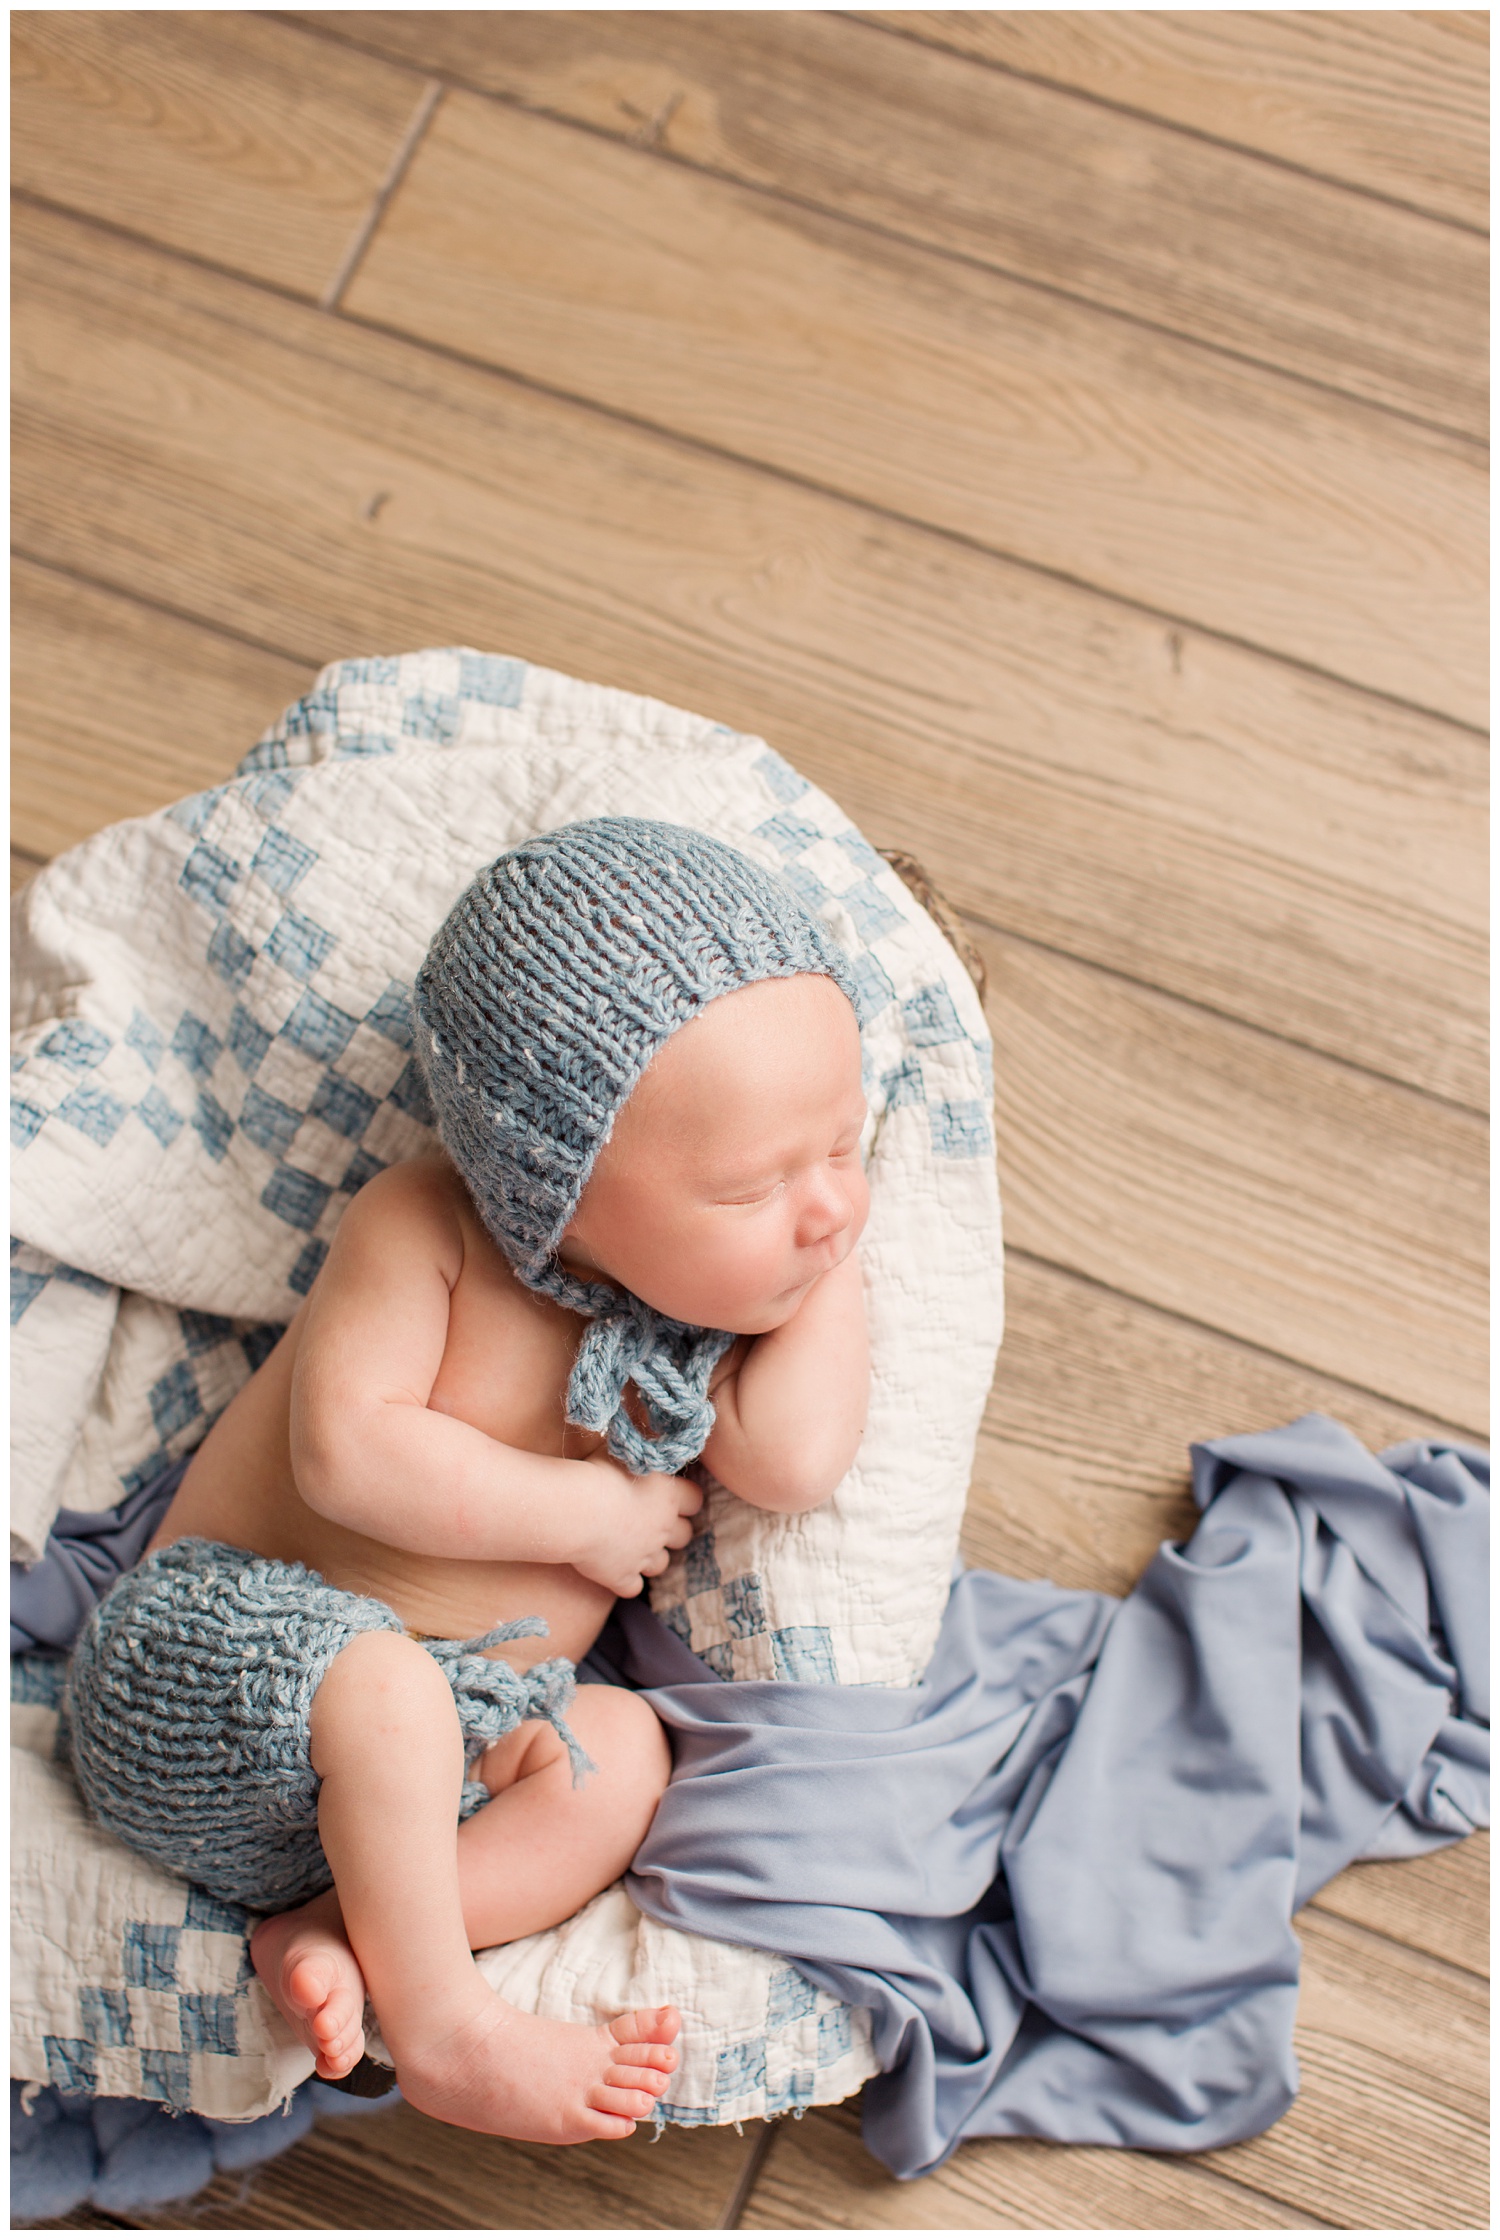 Newborn baby laying in a bowl covered with a quilt wearing a blue knit bonnet and shorts